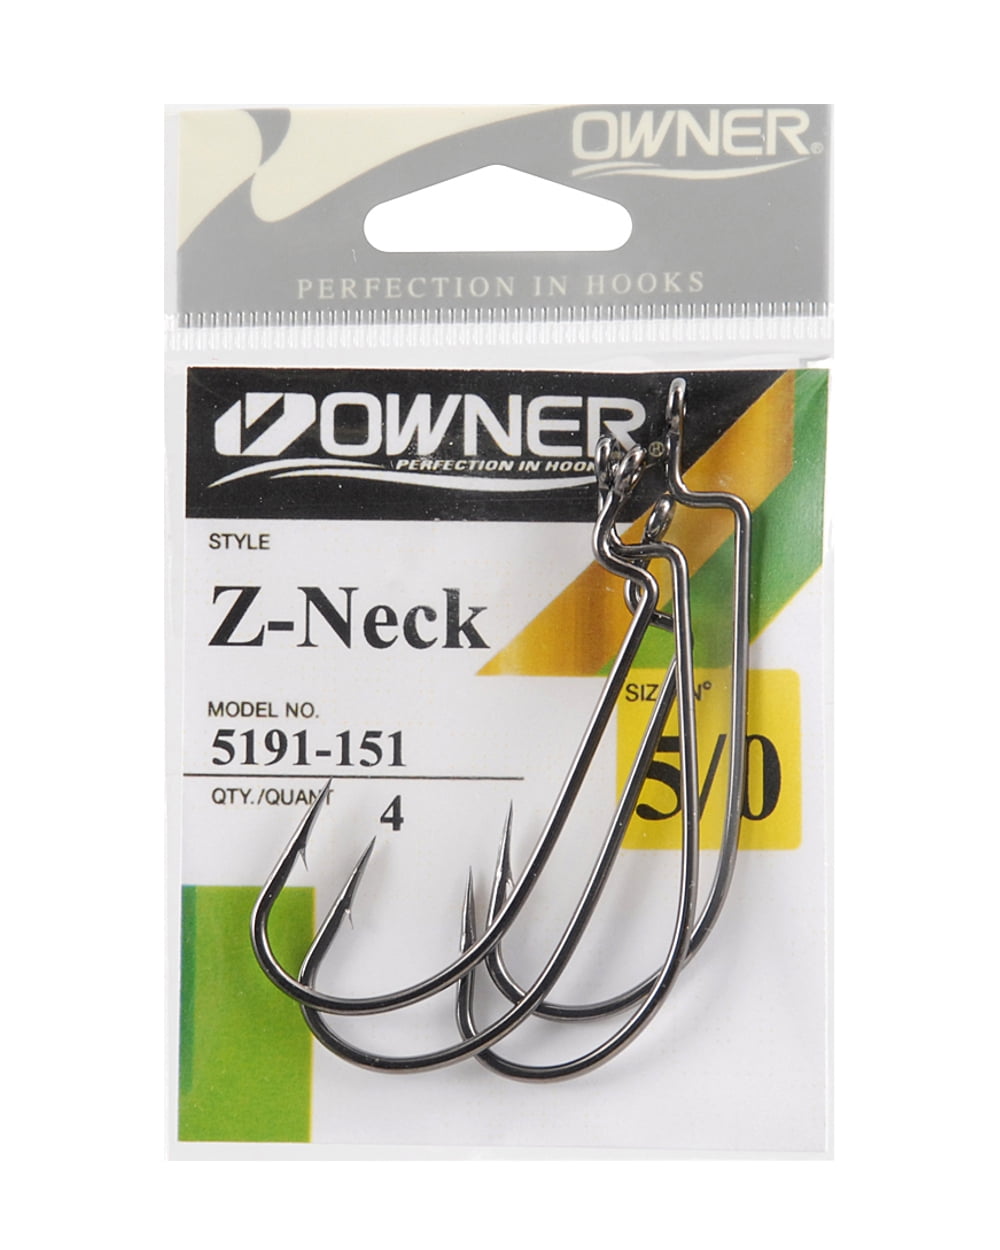 Owner 5191-151 All Purpose Worm Hook 4 per Pack Size 5/0 Fishing Hook 